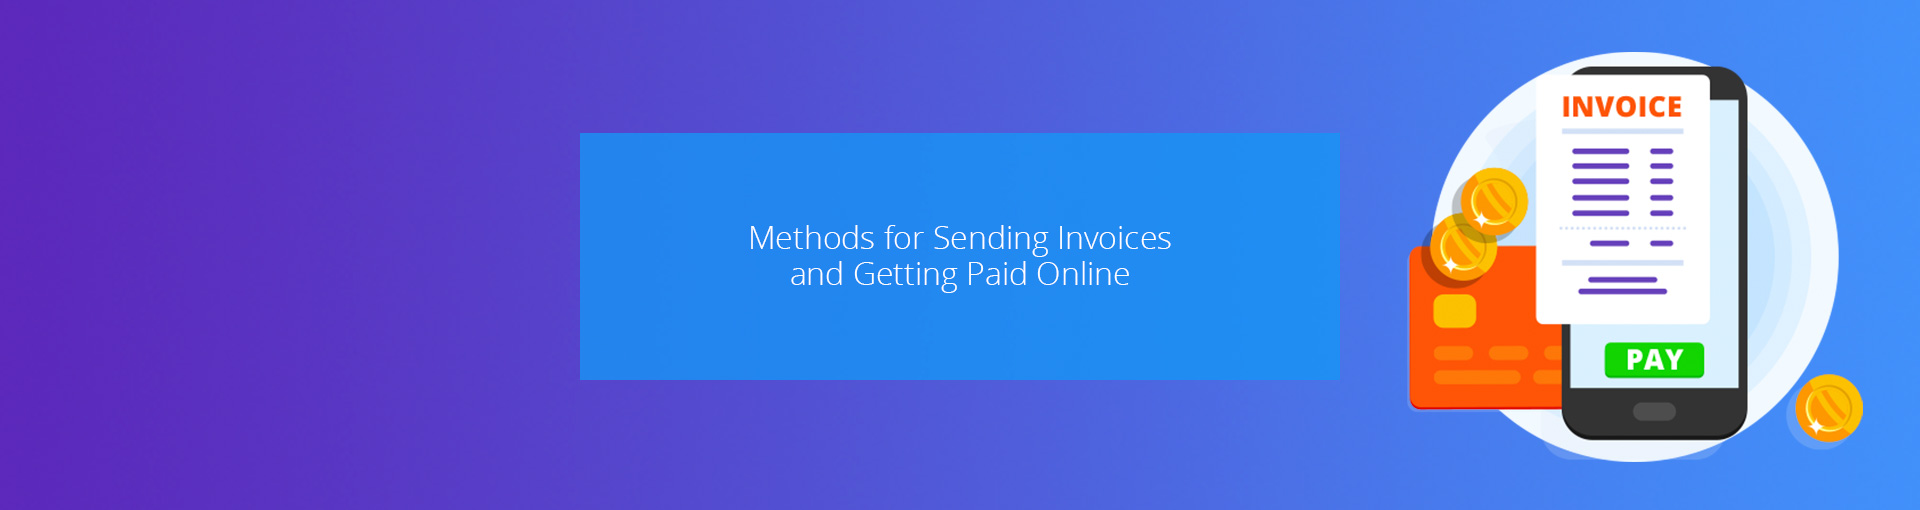 Methods for Sending Invoices and Getting Paid Online Featured Image